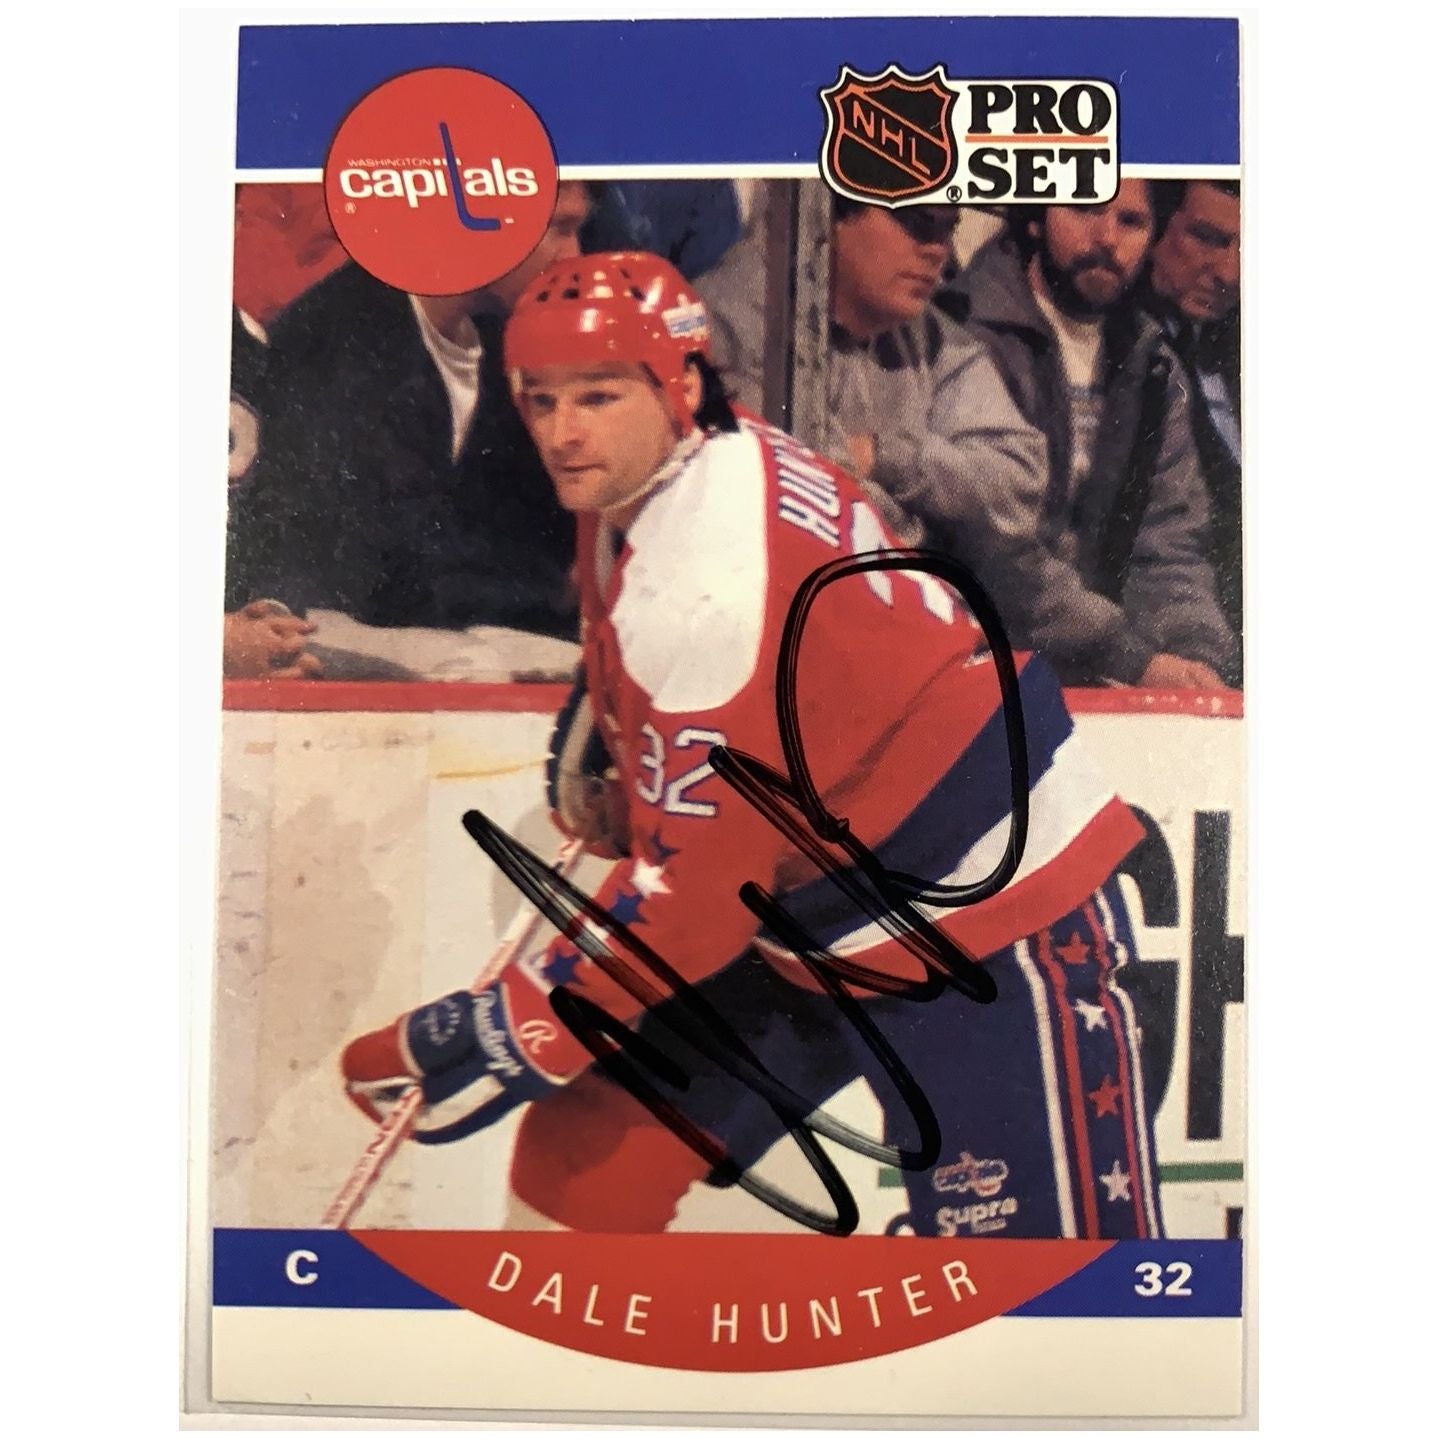  1990 Pro Set Dale Hunter In Person Auto  Local Legends Cards & Collectibles